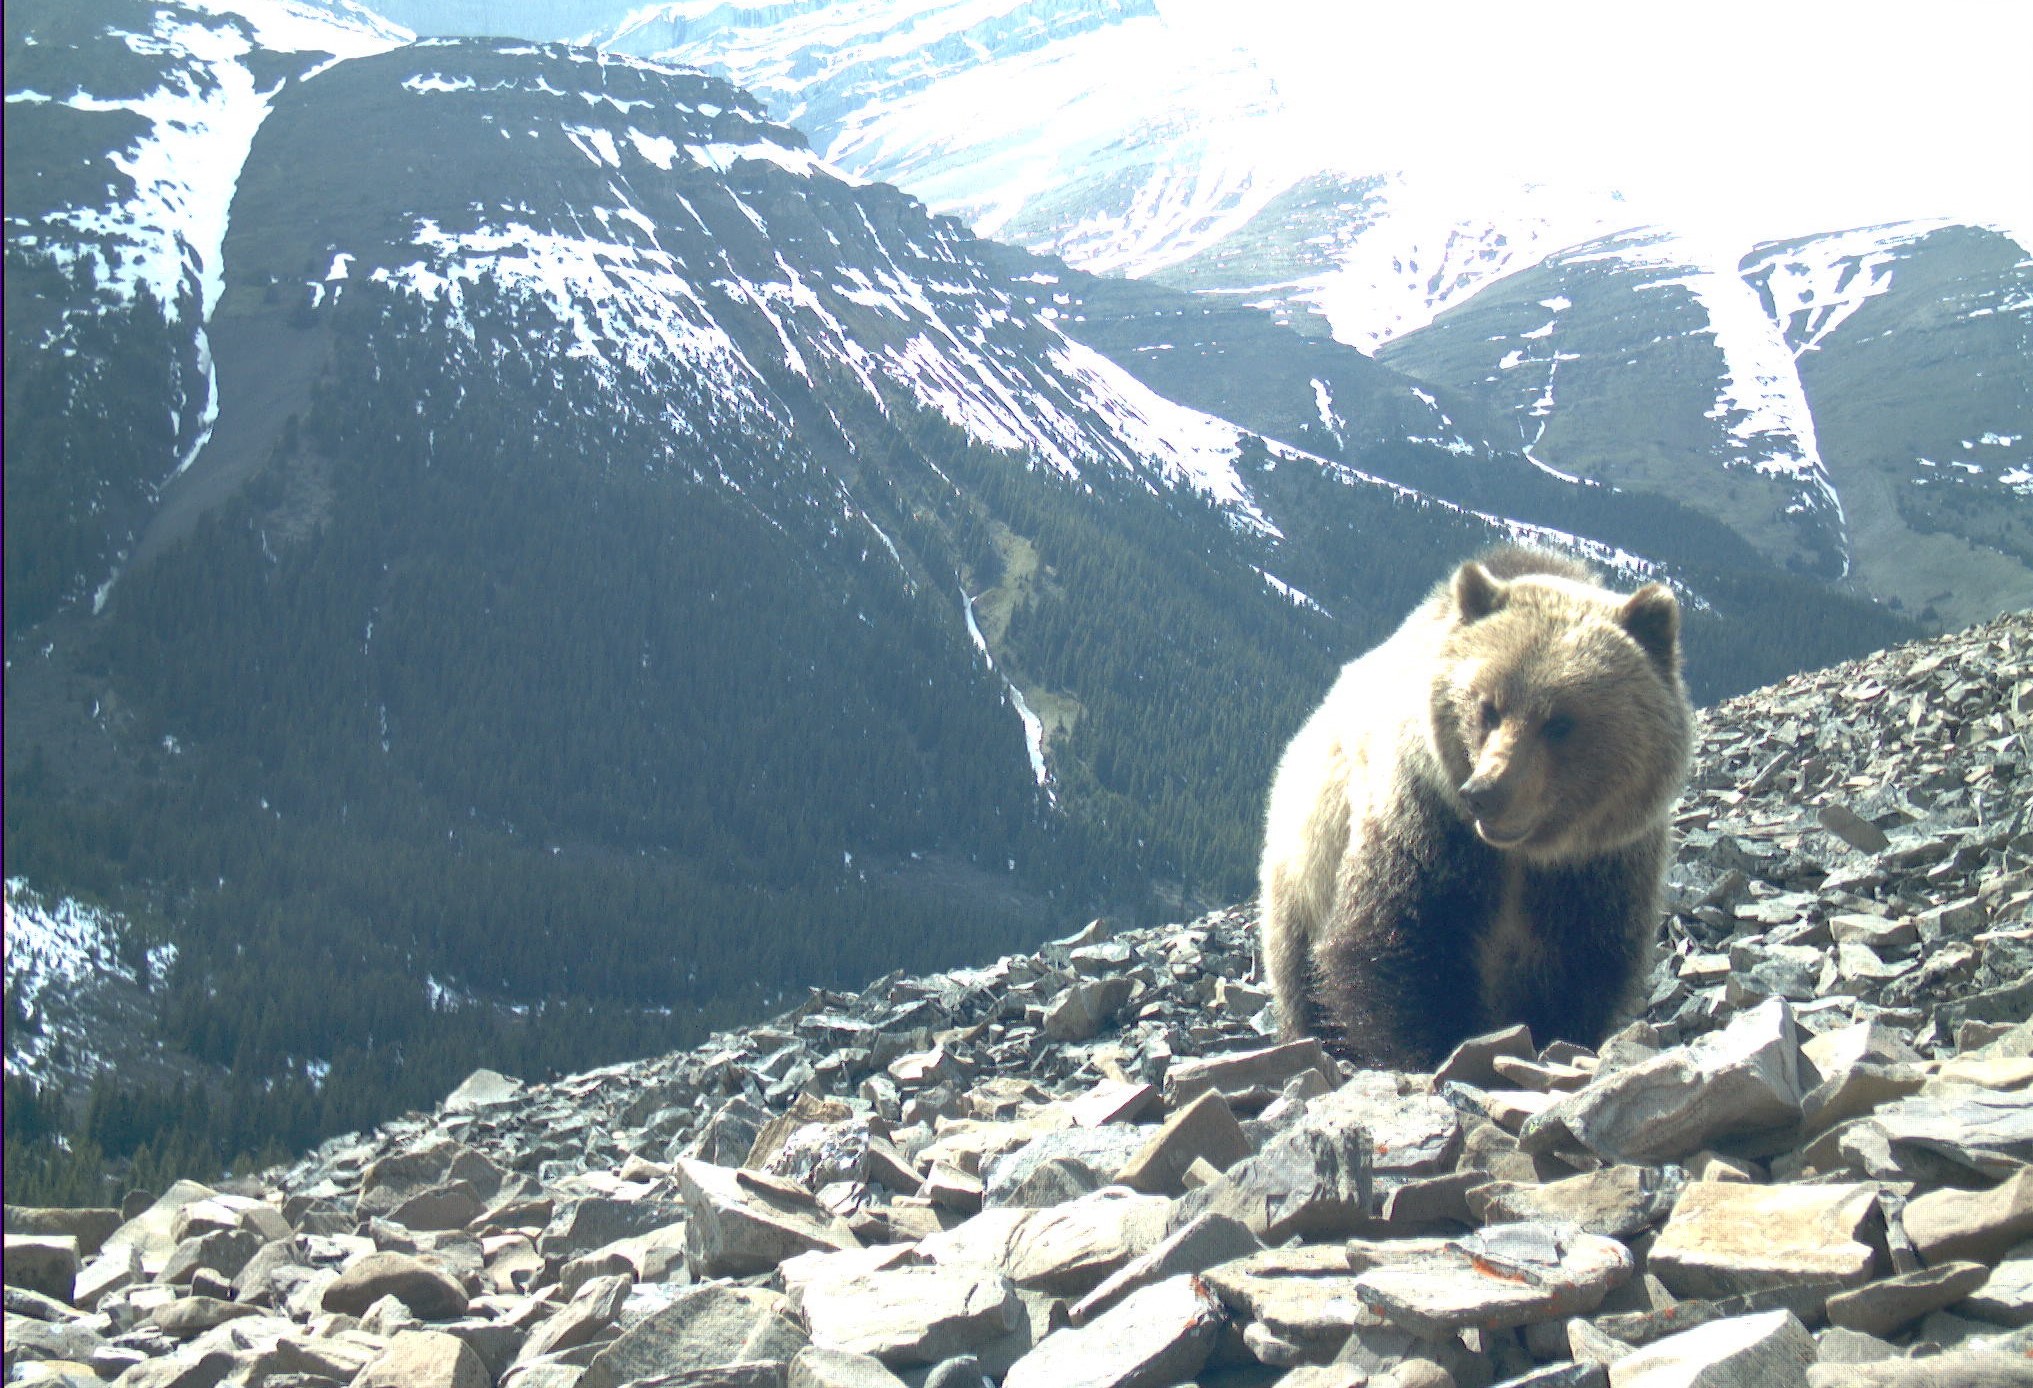 A grizzly on the side of a rocky mountain.